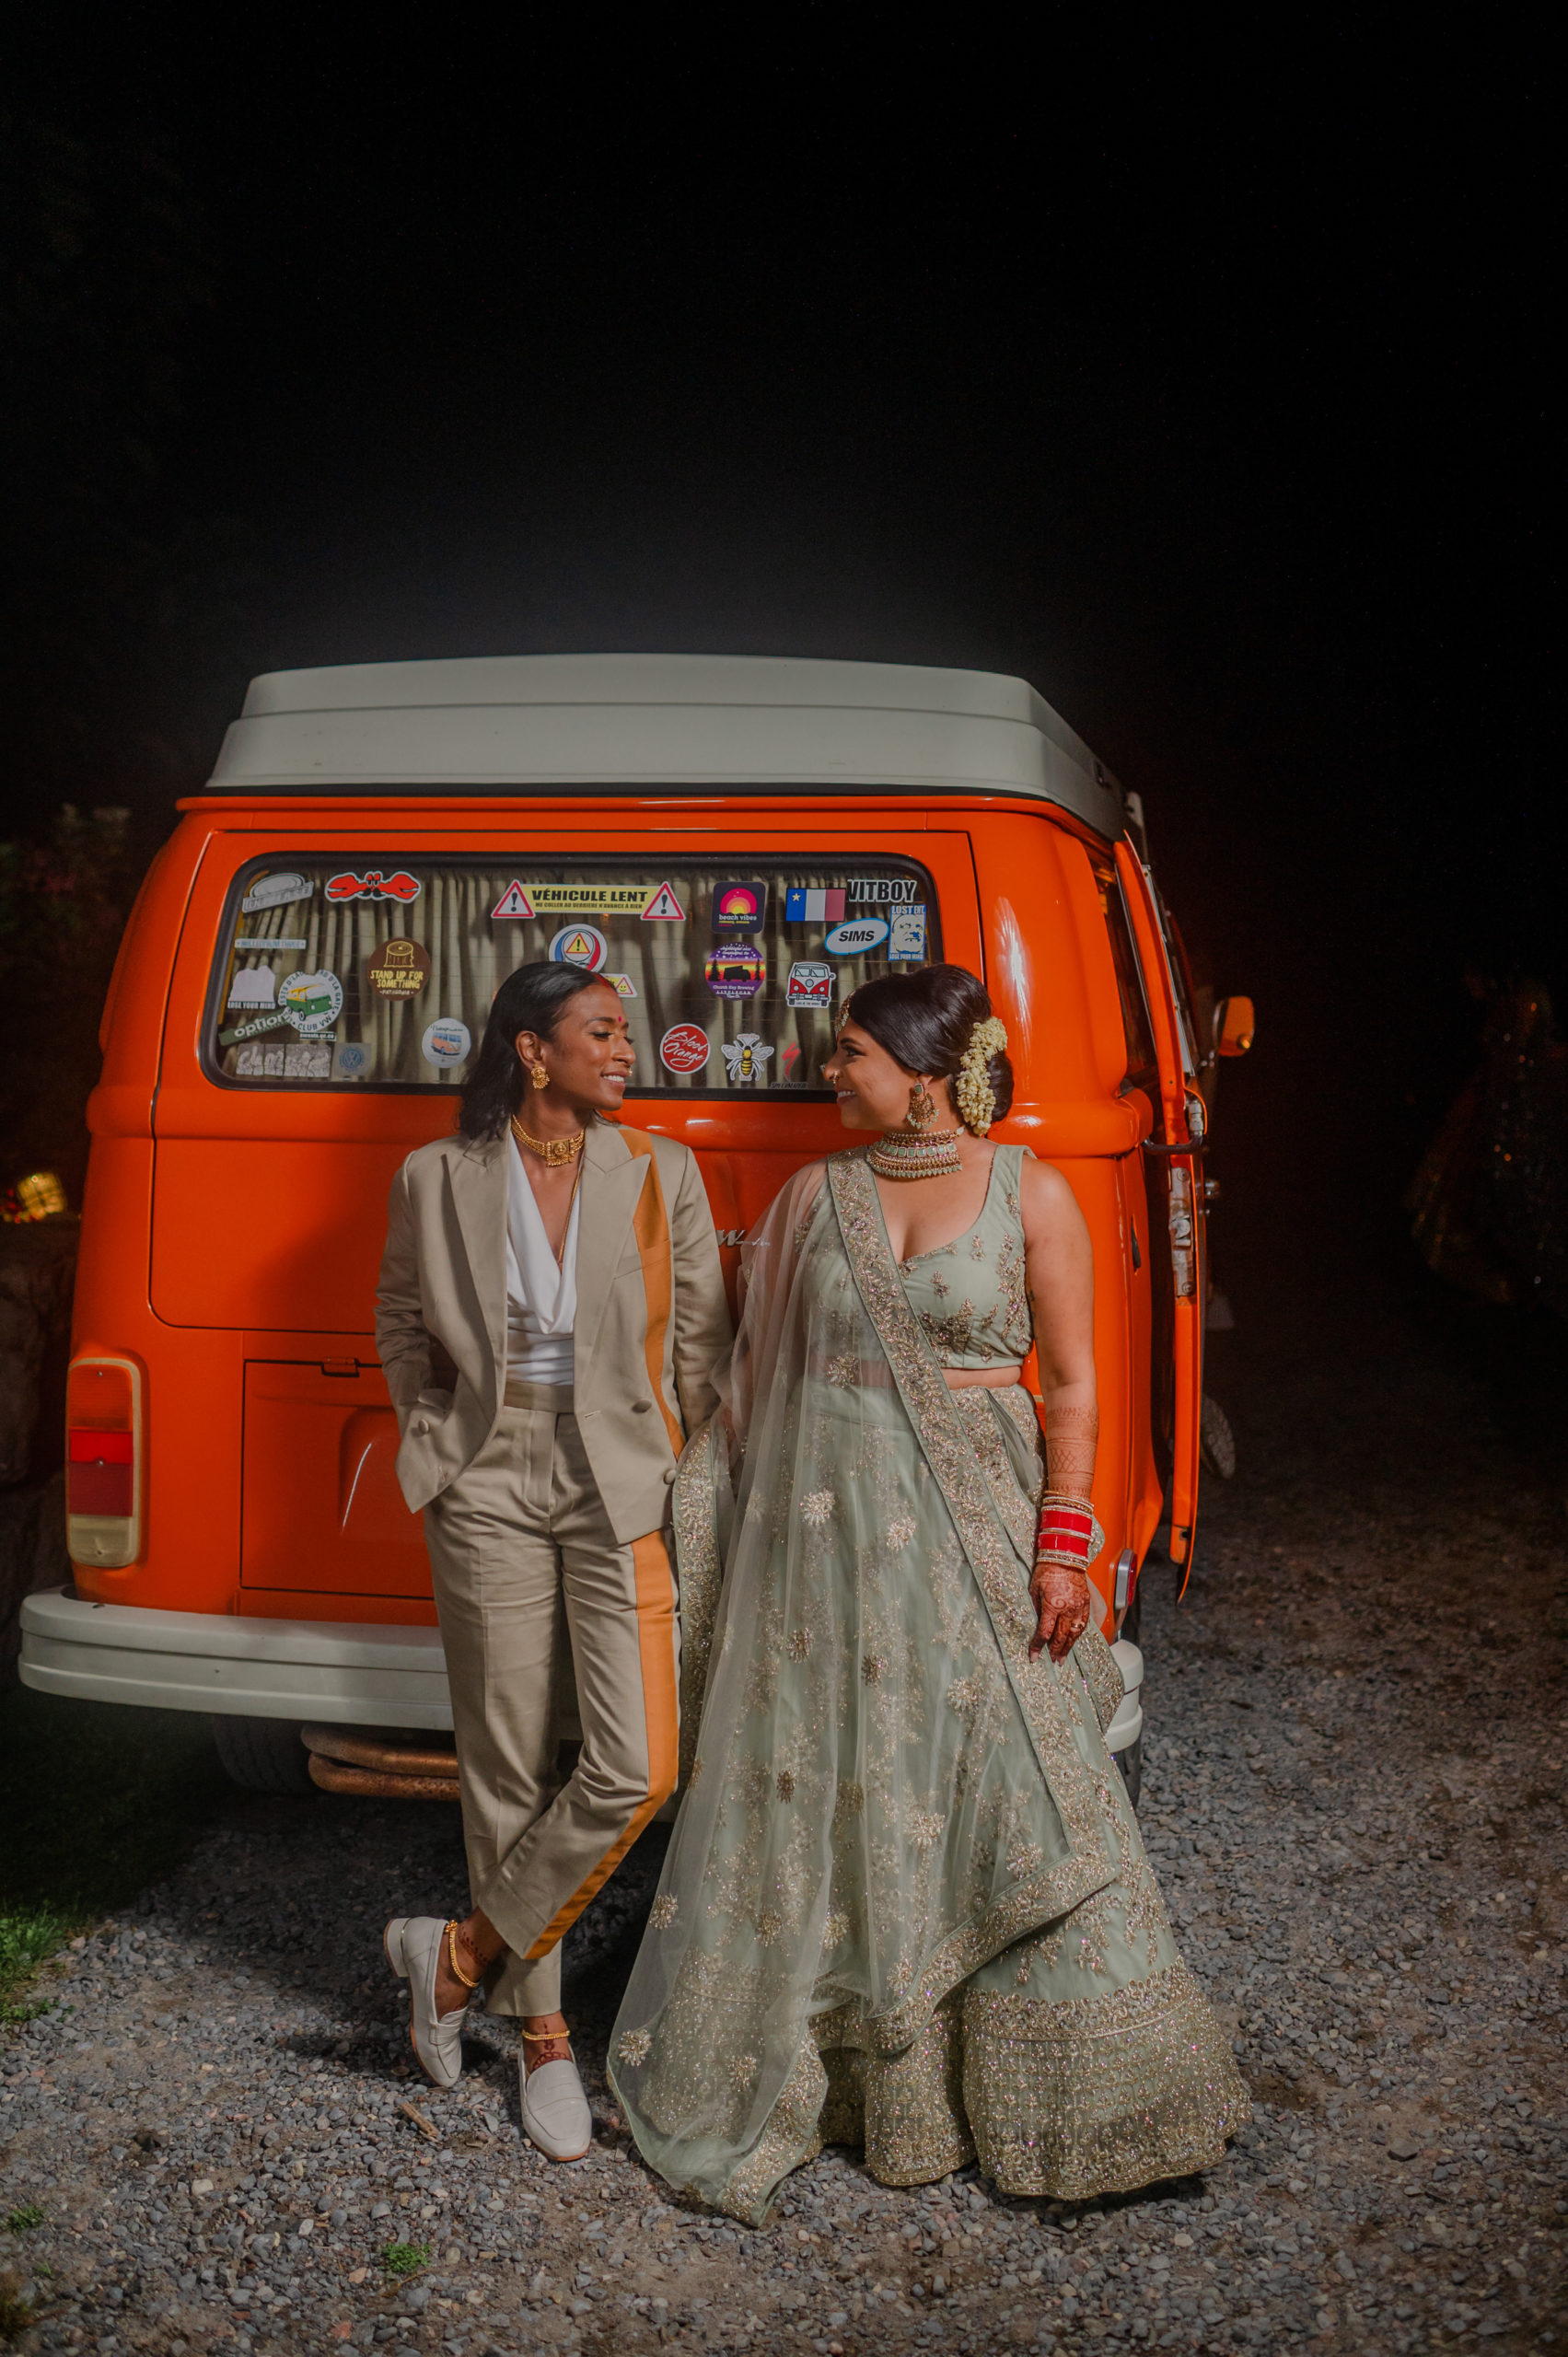 Two South Asian spouses stand in front of an orange camper van. The one on the left is wearing a tan suit with orange stripes, and the other wears a tan lehenga.